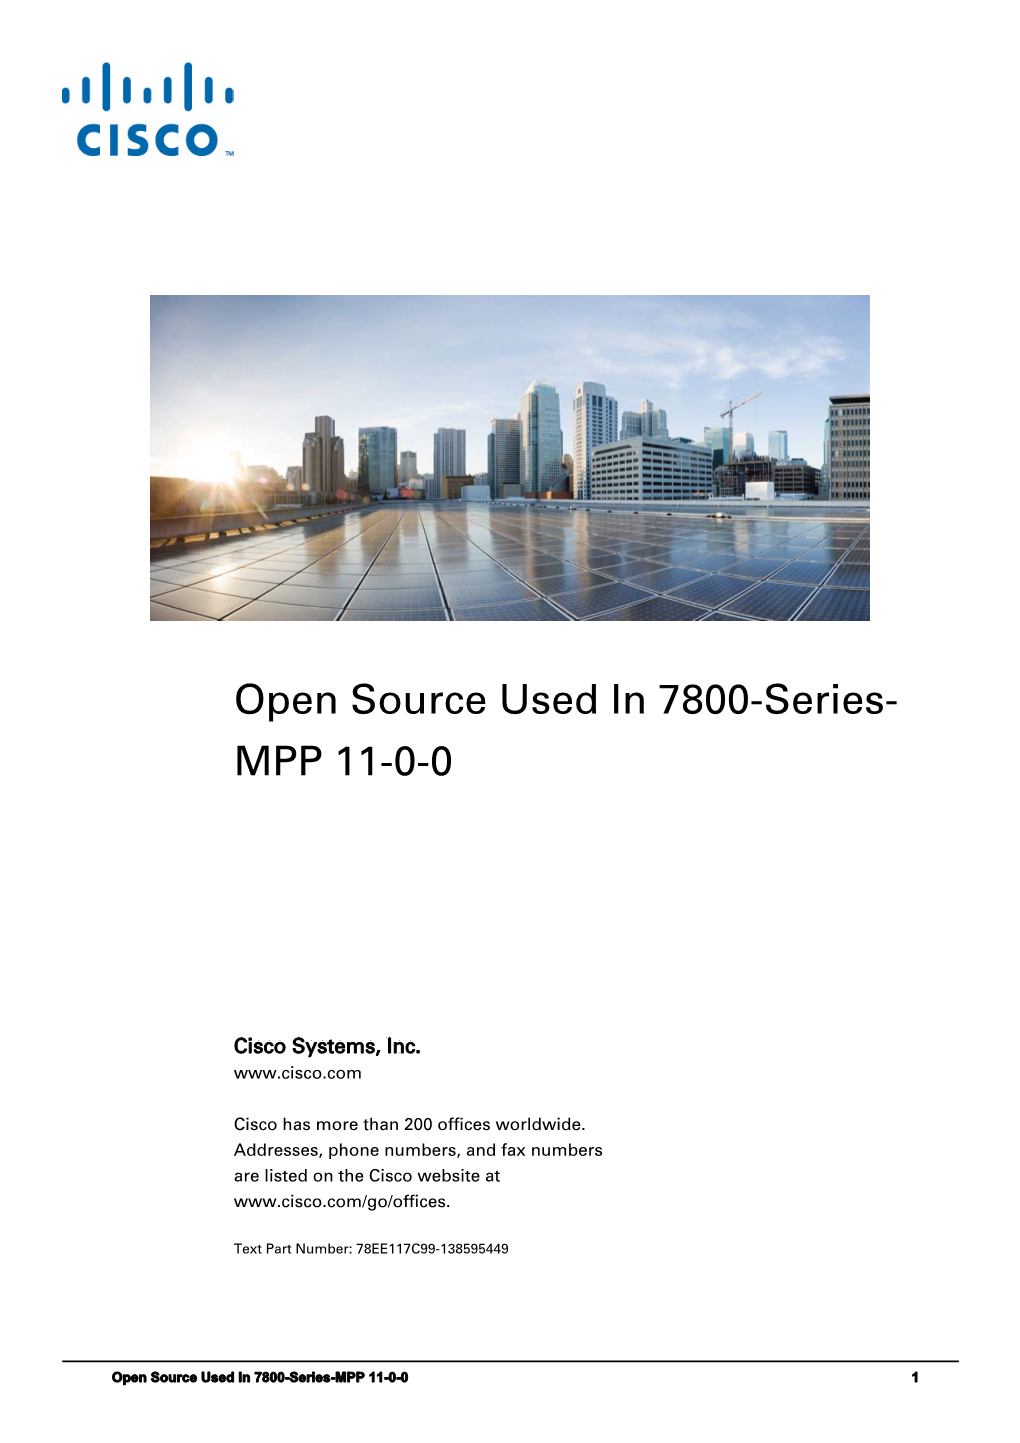 Open Source Used in 7800-Series- MPP 11-0-0